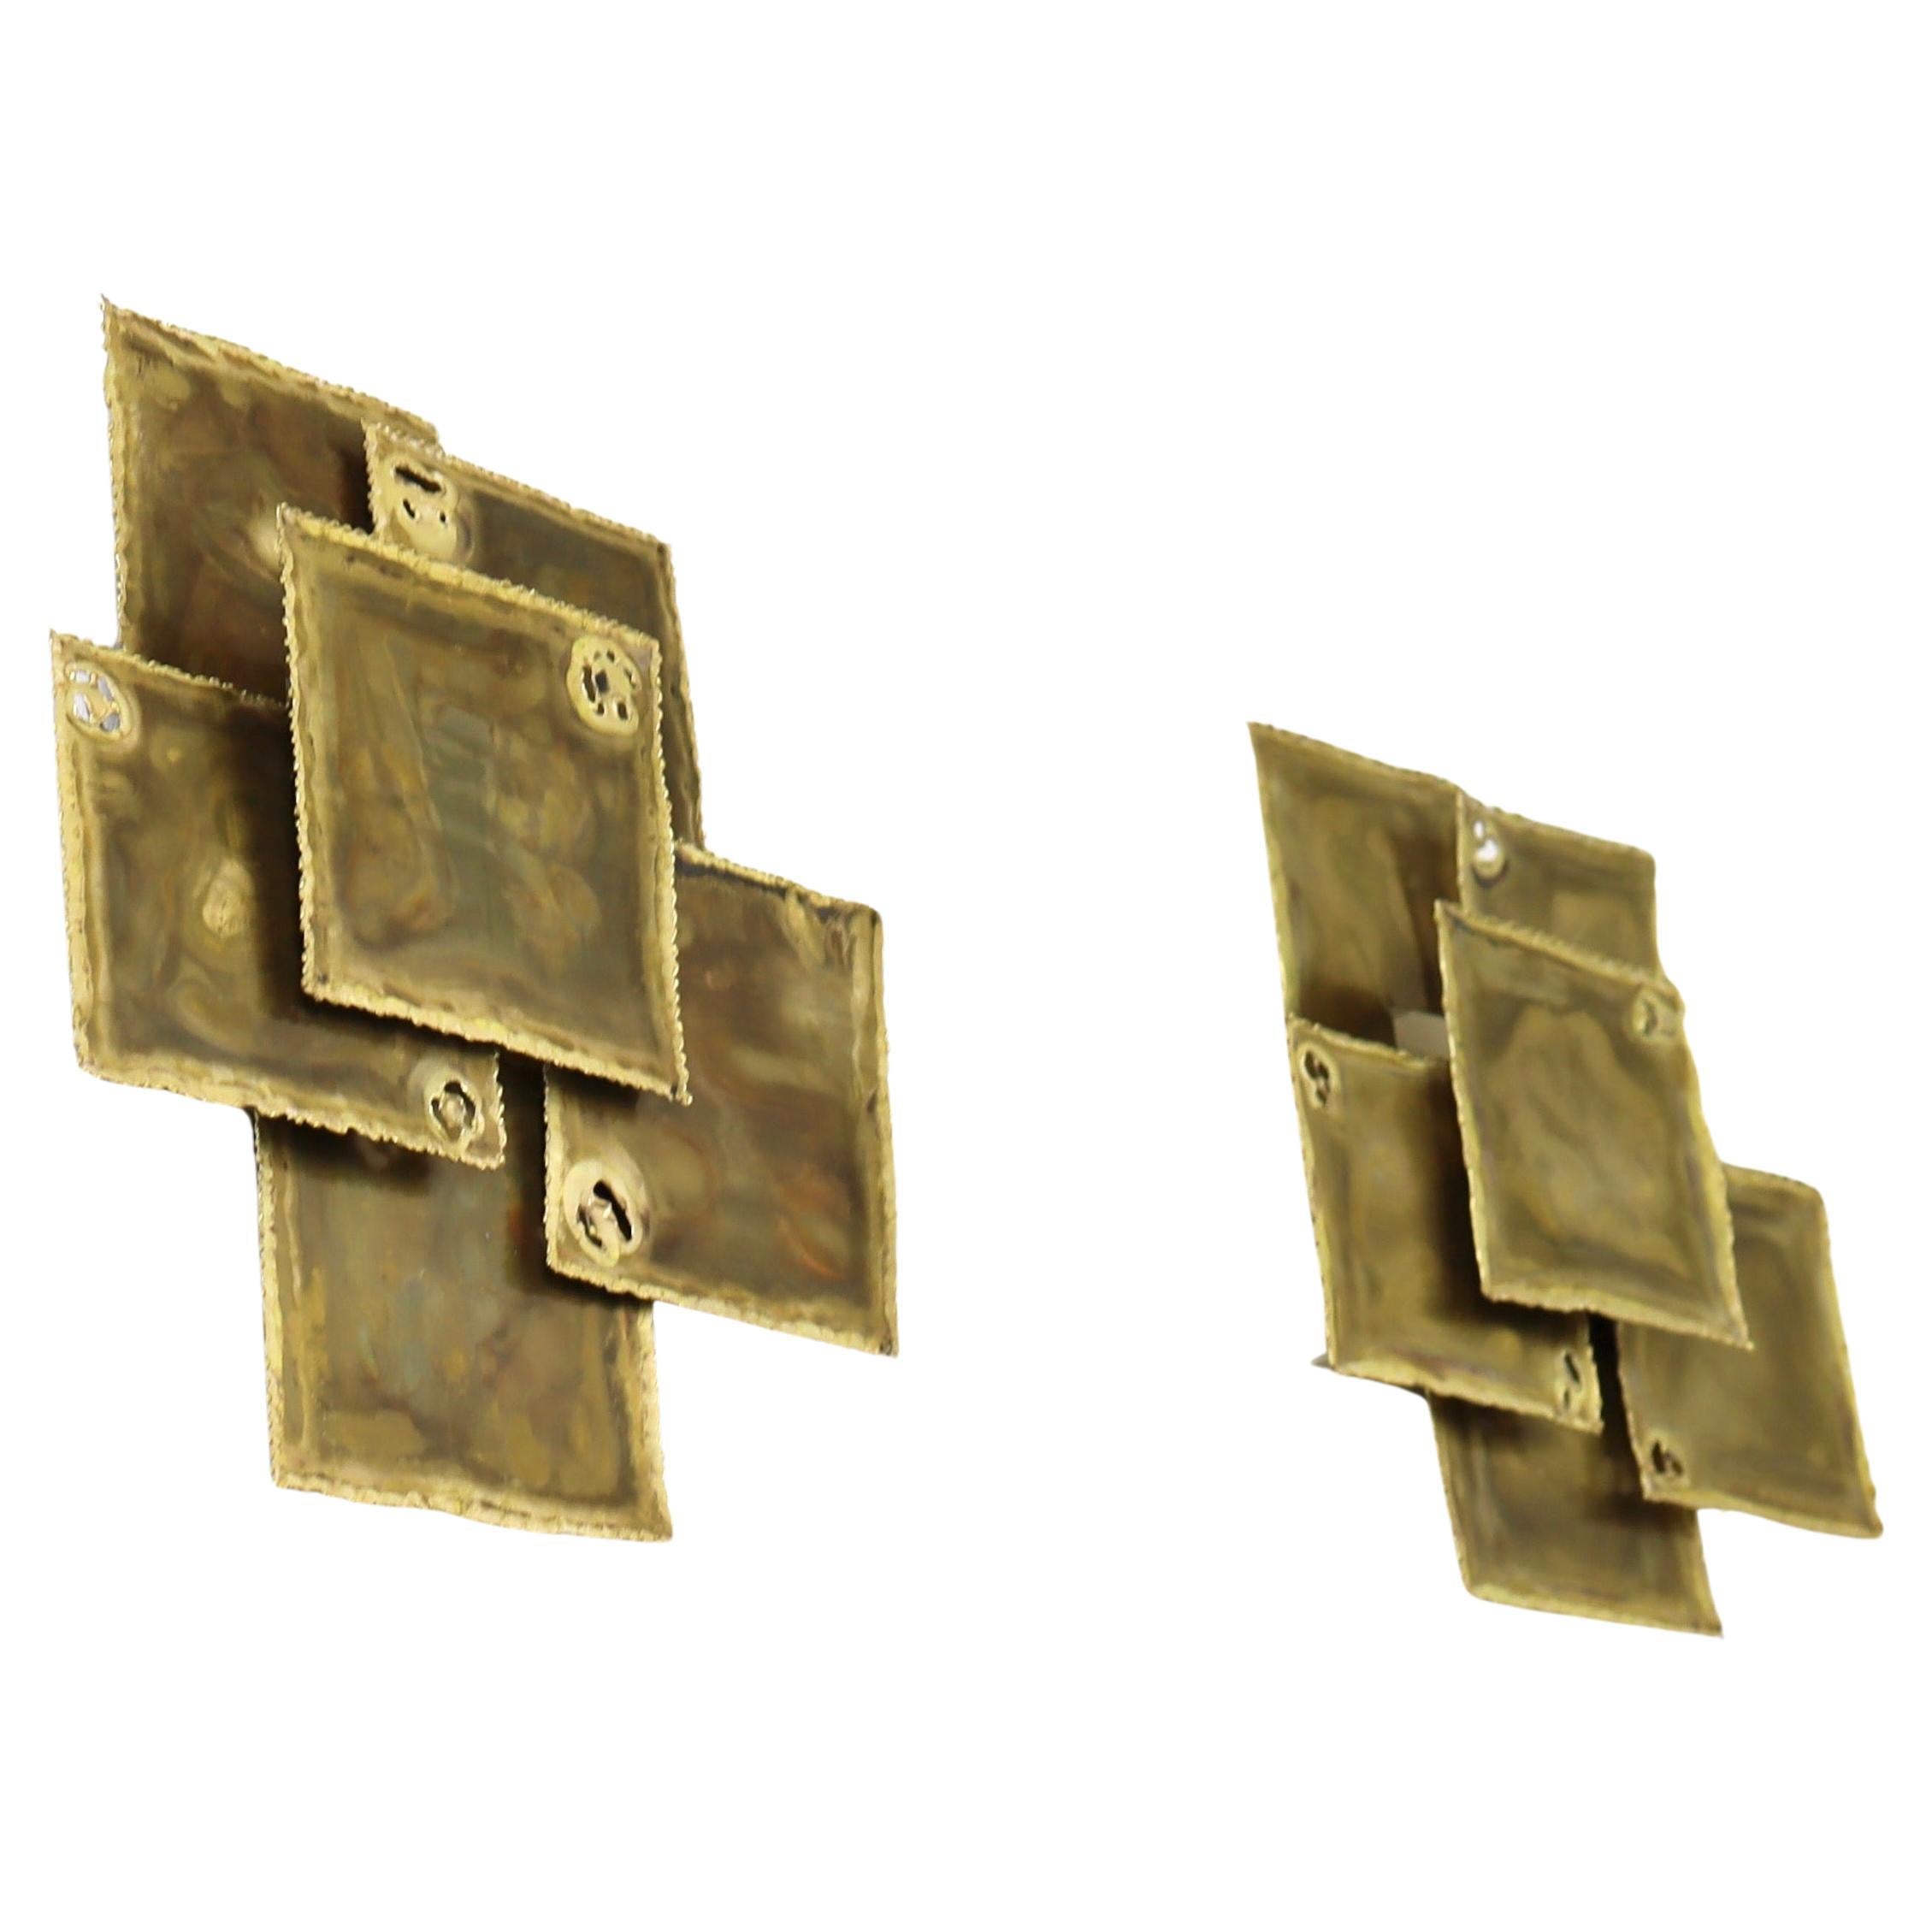 A pair of substantial brass wall lamps designed by Svend Aage Holm Sørensen in the 1960s. Finding a pair is not an everyday experience.

* A pair (2) of sconces with six square slates in flame-cut brass
* Designer: Svend Aage Holm Sorensen
* Model: